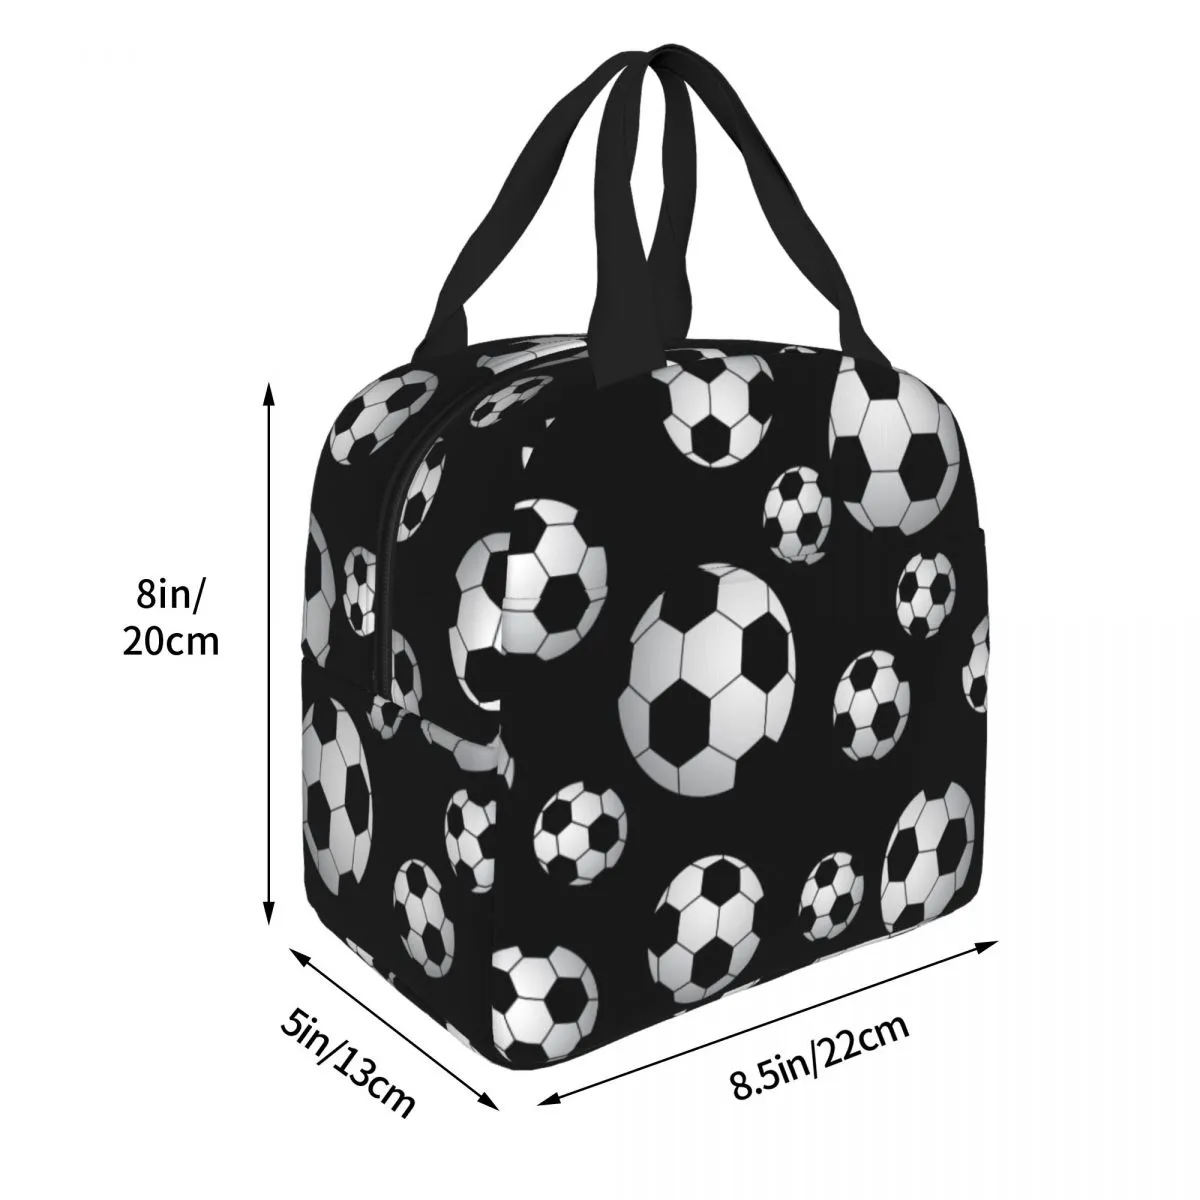 Soccer Pattern Insulated Lunch Bags High Capacity Football Balls Sports Reusable Thermal Bag Tote Lunch Box Outdoor Food Handbag